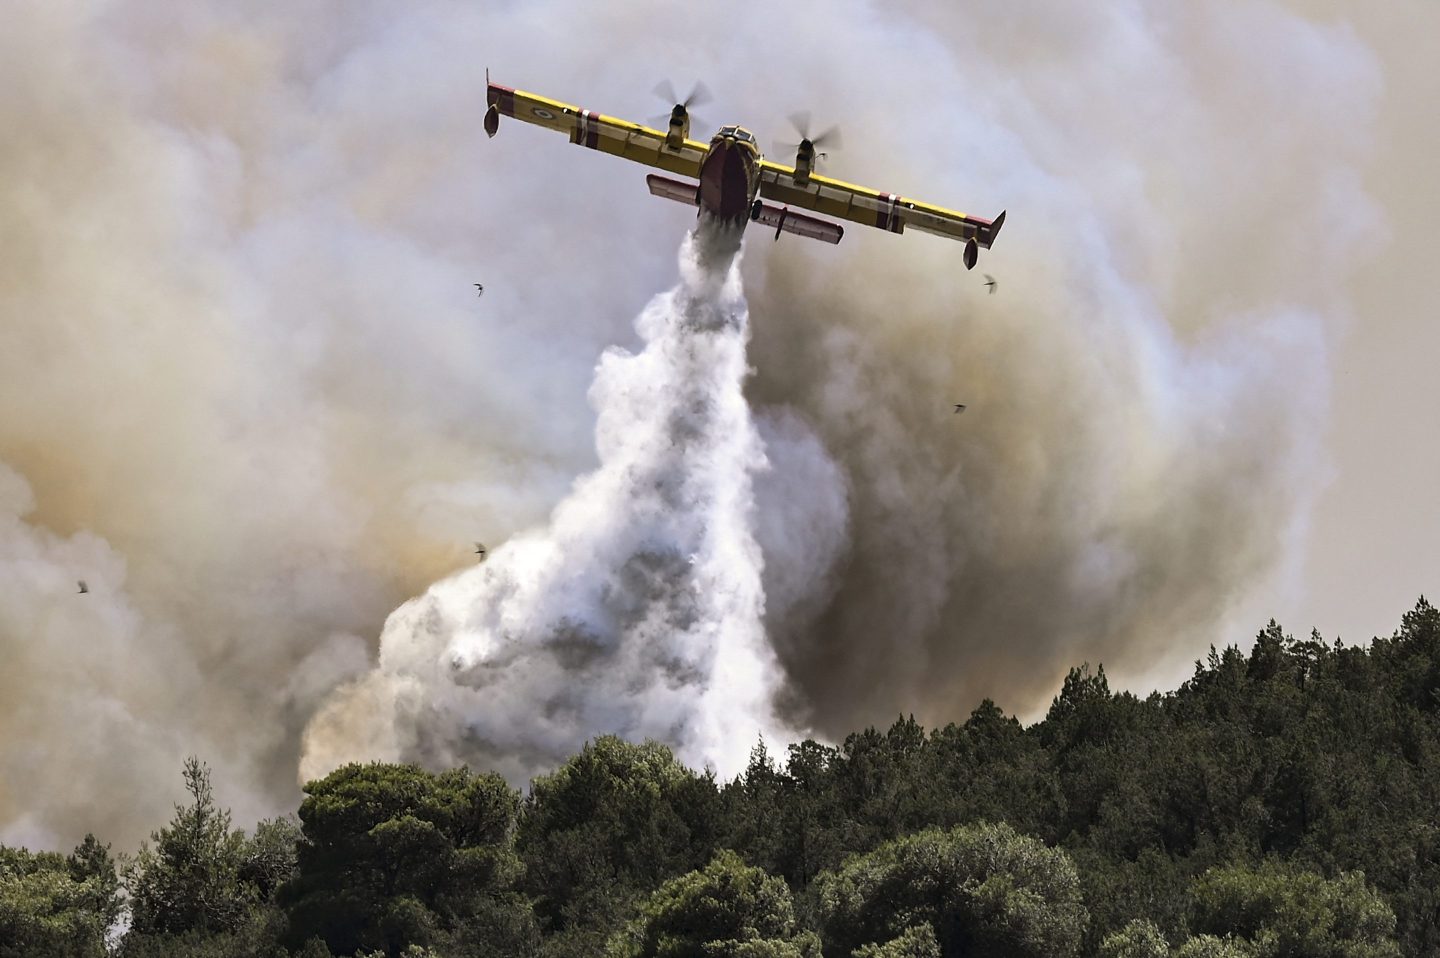 A Canadair firefighting plane sprays water during a fire in Dervenochoria, north-west of Athens, on July 19, 2023. Extreme heat was forecast across the globe on July 19, 2023, as wildfires raged and health warnings were in place in parts of Asia, Europe and North America. Firefighters battled blazes in parts of Greece and the Canary Islands, while Spain issued heat alerts and some children in Italy&#039;s Sardinia were told to stay away from sports. (Photo by Spyros BAKALIS / AFP) (Photo by SPYROS BAKALIS/AFP via Getty Images)